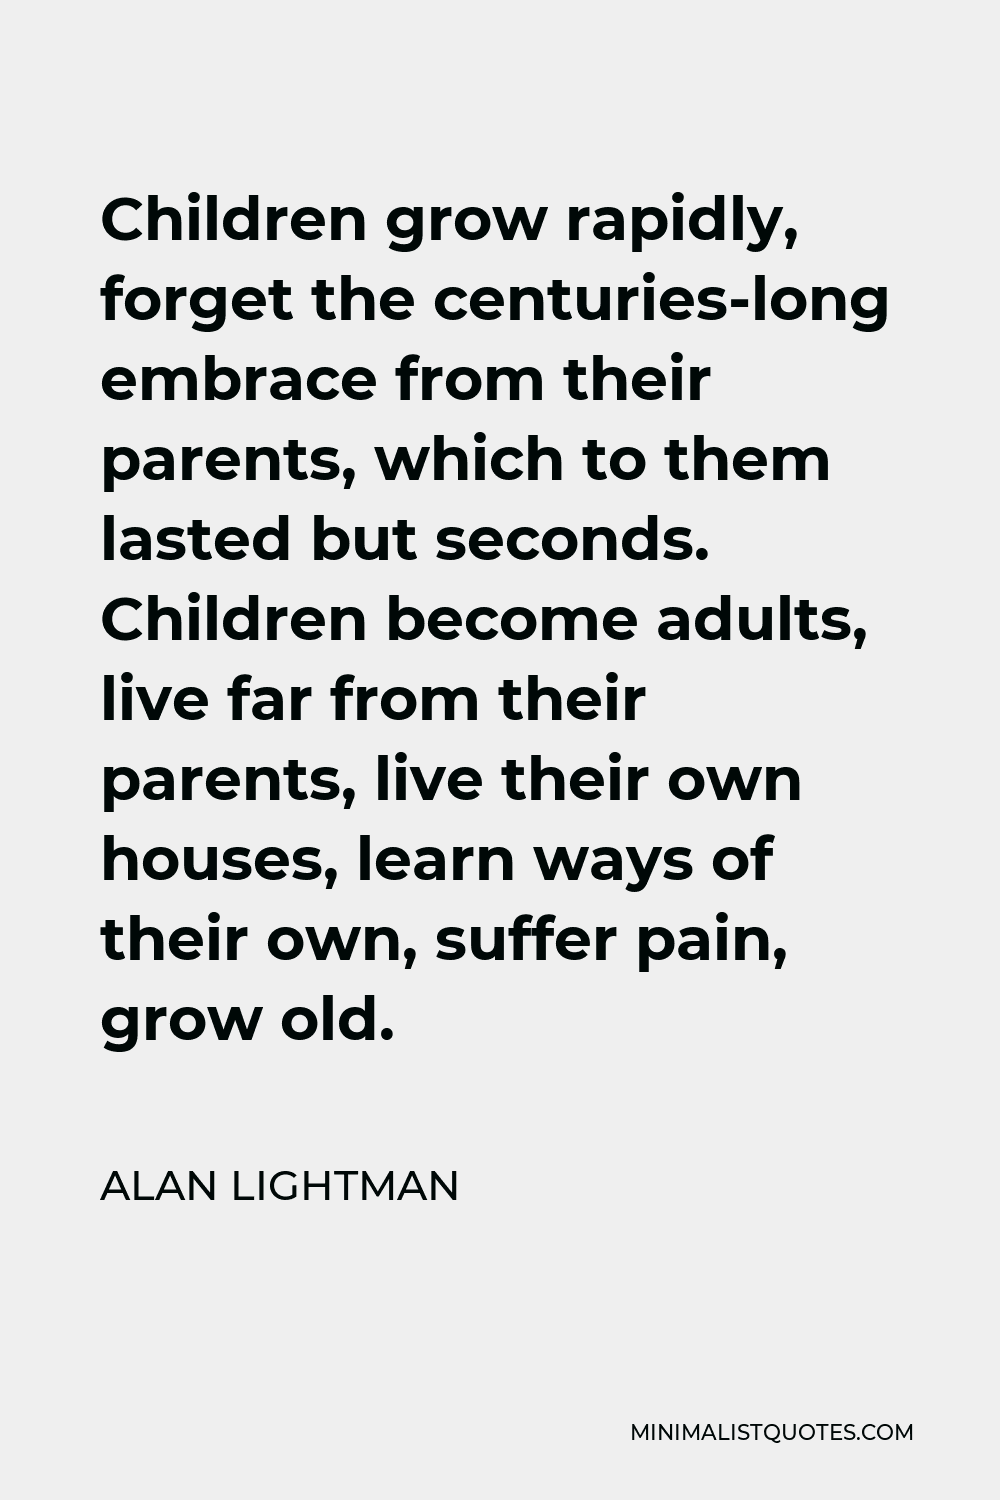 Alan Lightman Quote - Children grow rapidly, forget the centuries-long embrace from their parents, which to them lasted but seconds. Children become adults, live far from their parents, live their own houses, learn ways of their own, suffer pain, grow old.